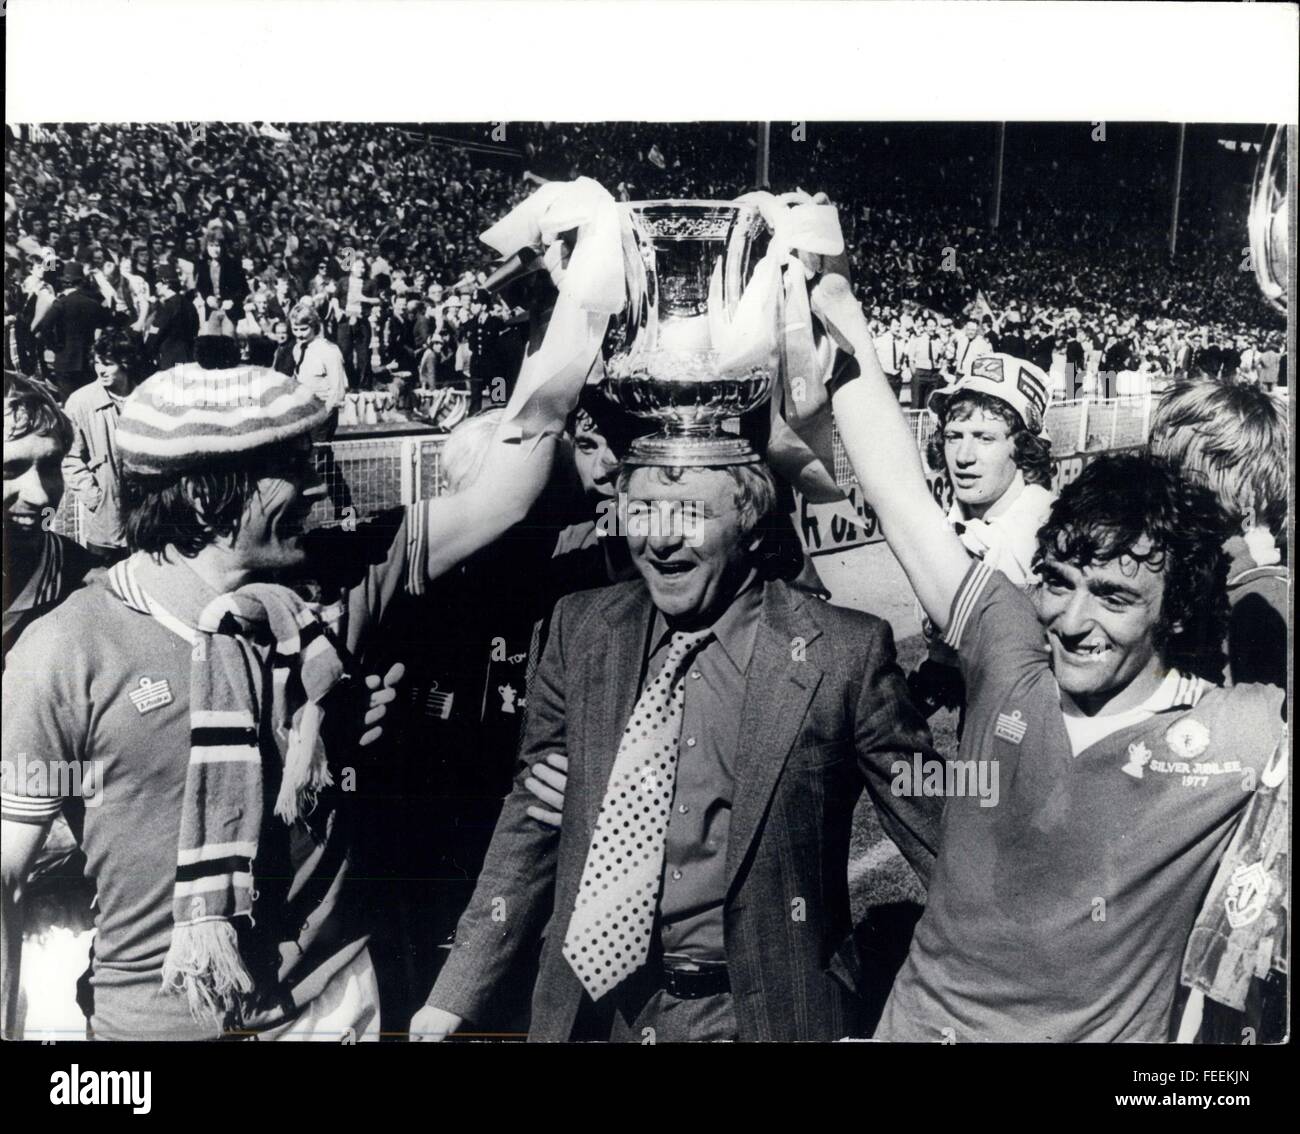 1973 - Manchester United Win The F.A. Cup Final Beating Liverpool By 2-1: At Wembley last Saturday Manchester United beat Liverpool by two goals to one in the Final of the F.A. Cup. For their manager Tommy Docherty this was his first Wembley success over the past 20 years, as a player and as a manager he had never won at Wembley, United were the esten finalists last year, when beaten by Southampton 1-0, so this year was Tommy's finest hour. Photo Shows: Tommy Docherty with the F.A. Cup on his head with the help of Goalscorer Stuart Pearson, left and Lou Macari as they do a lap of honour aroun Stock Photo